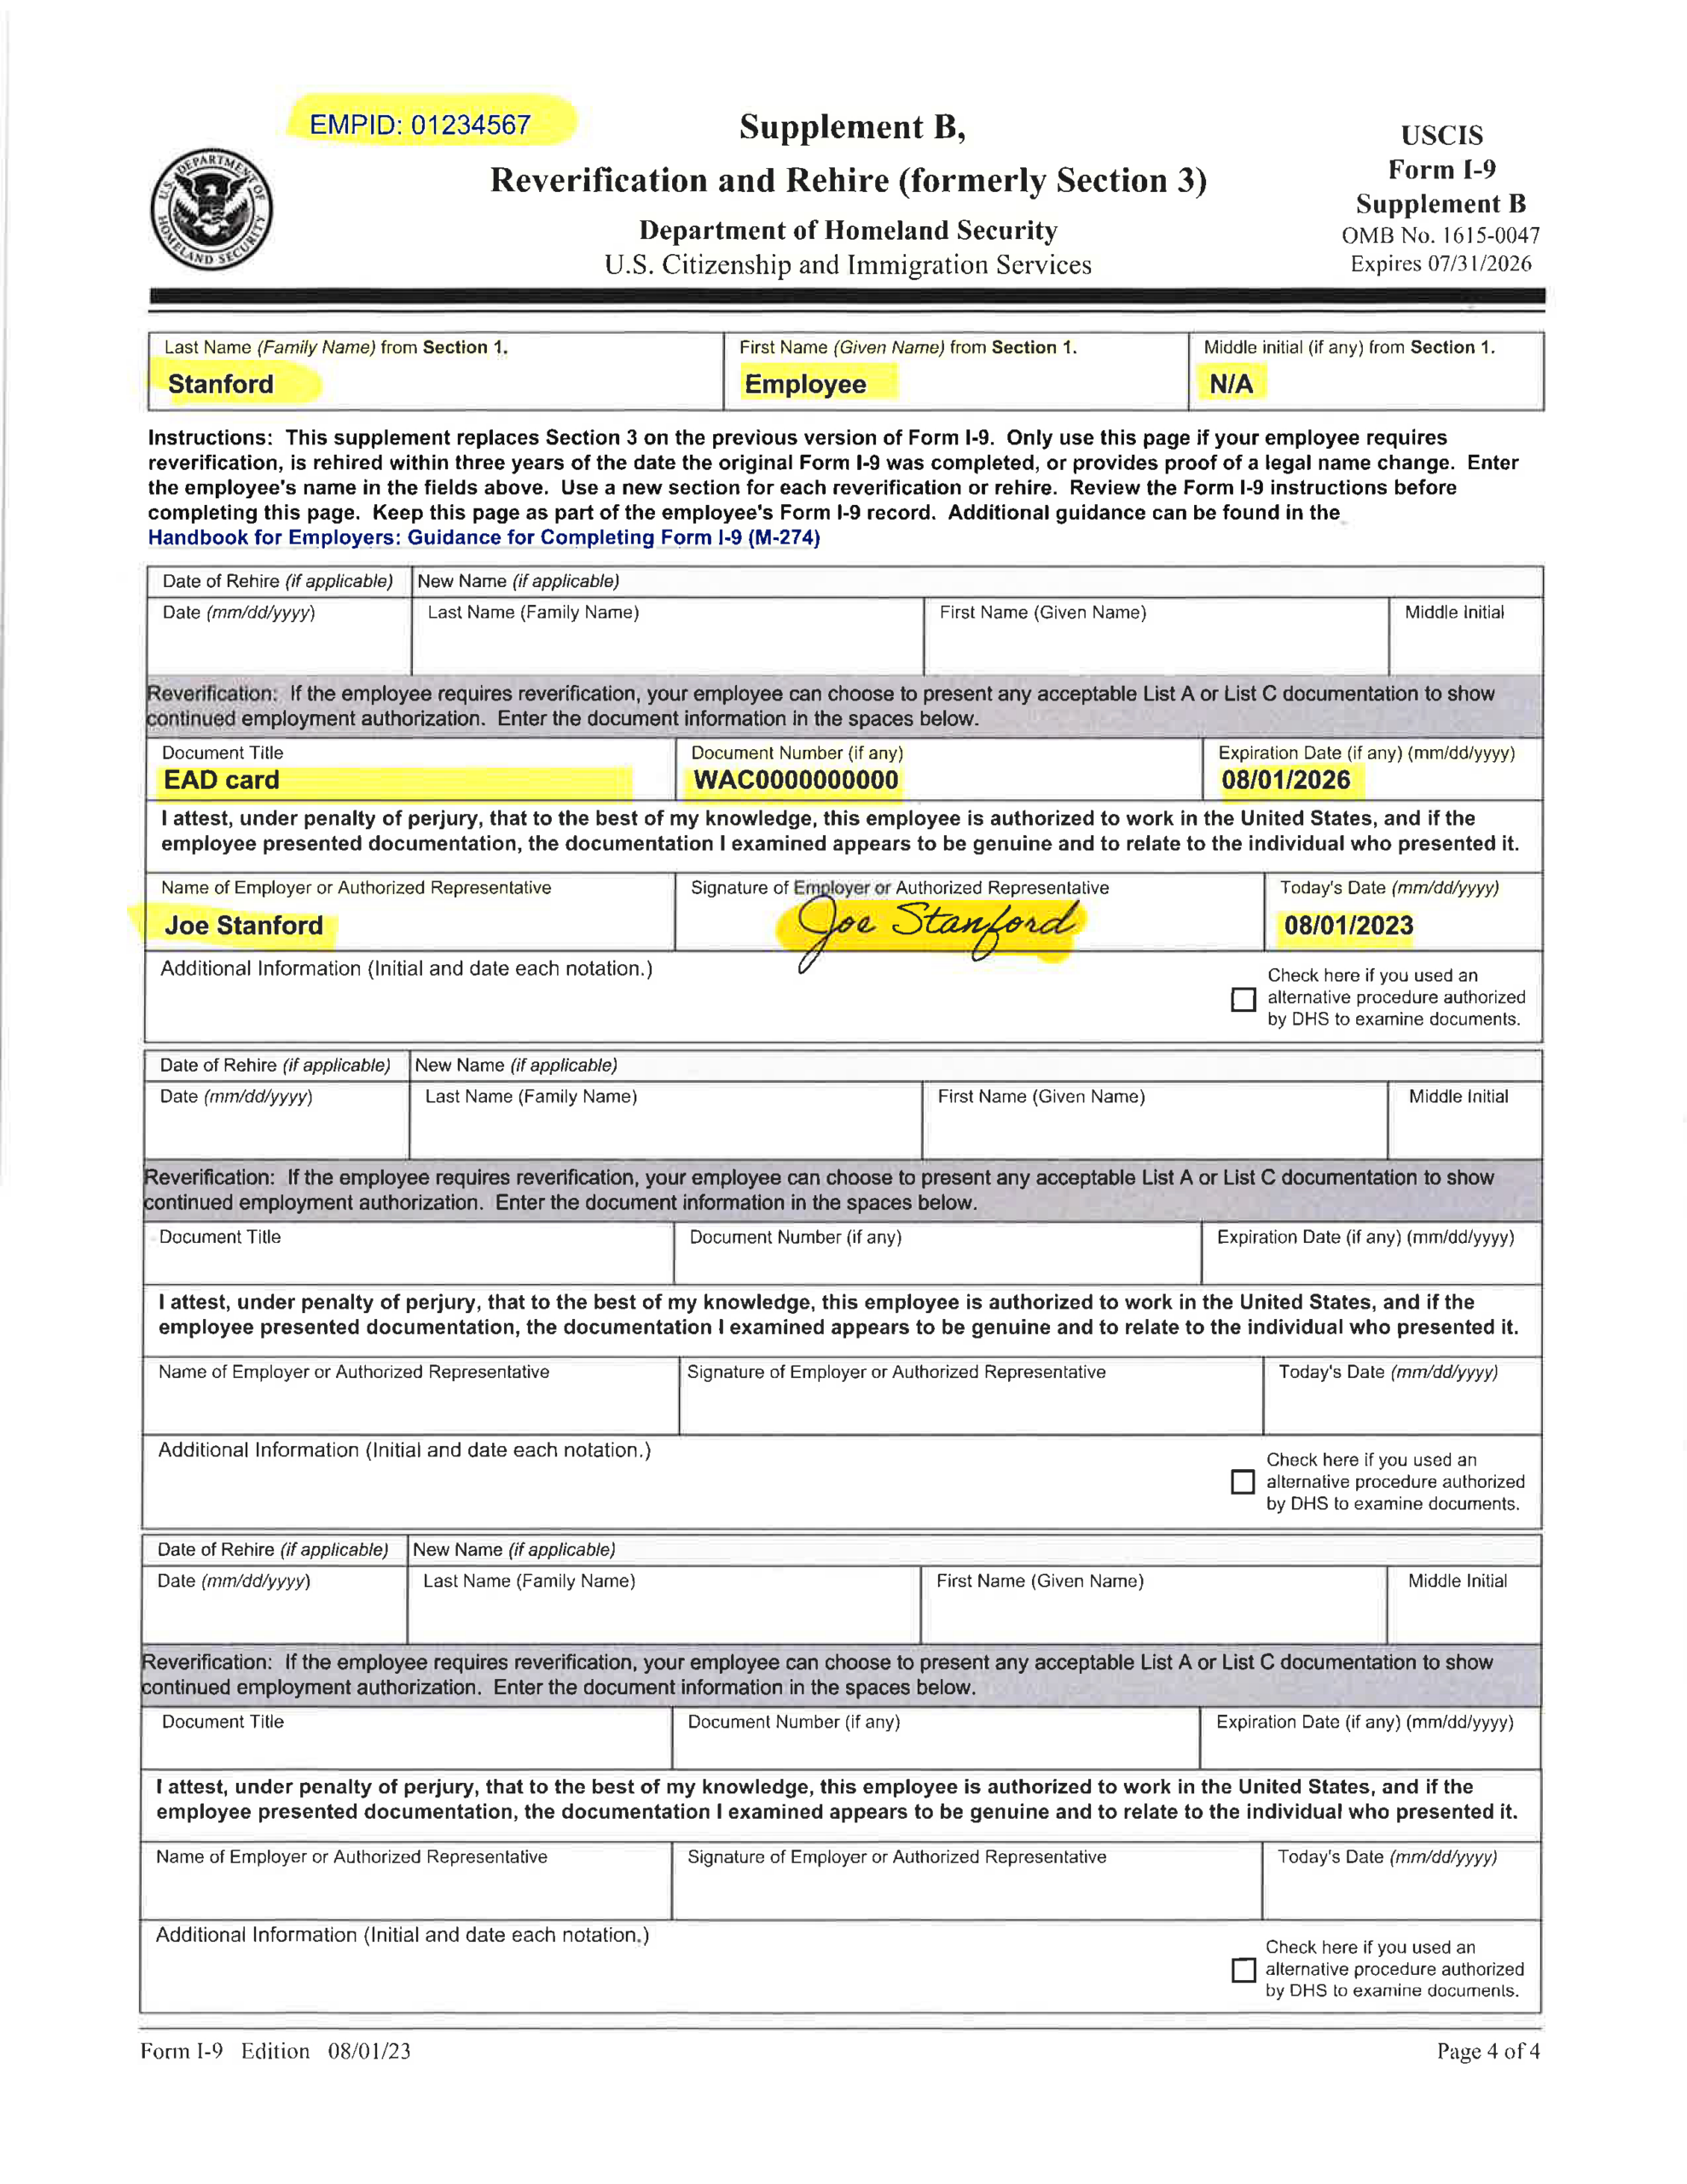 Examples Of Updated Form I-9 within Current I-9 Form